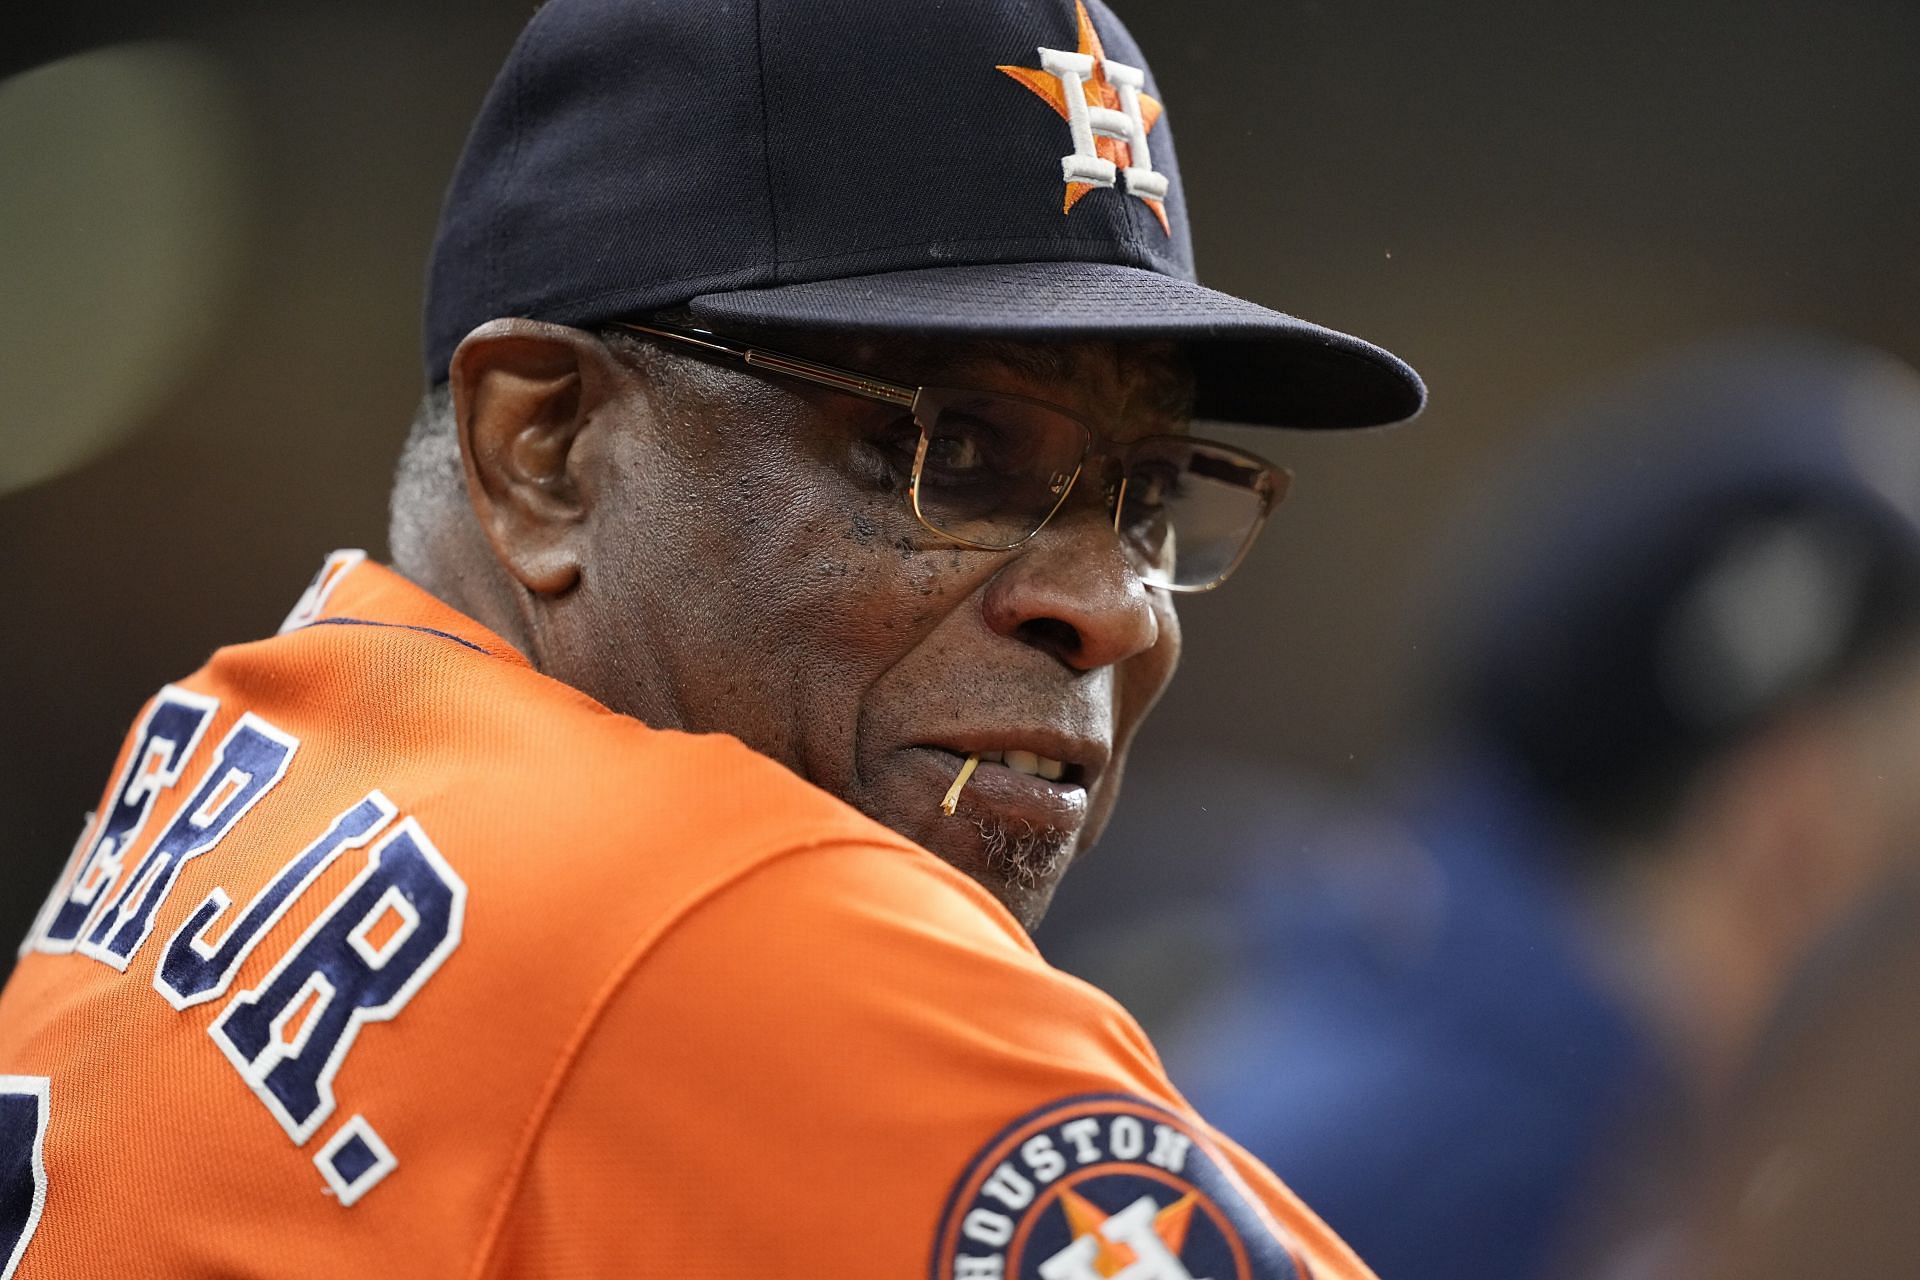 After 25 seasons as a manager, Dusty Baker has announced that he will retire. However, his intentions are to remain in the game of baseball assuming an advisory role.